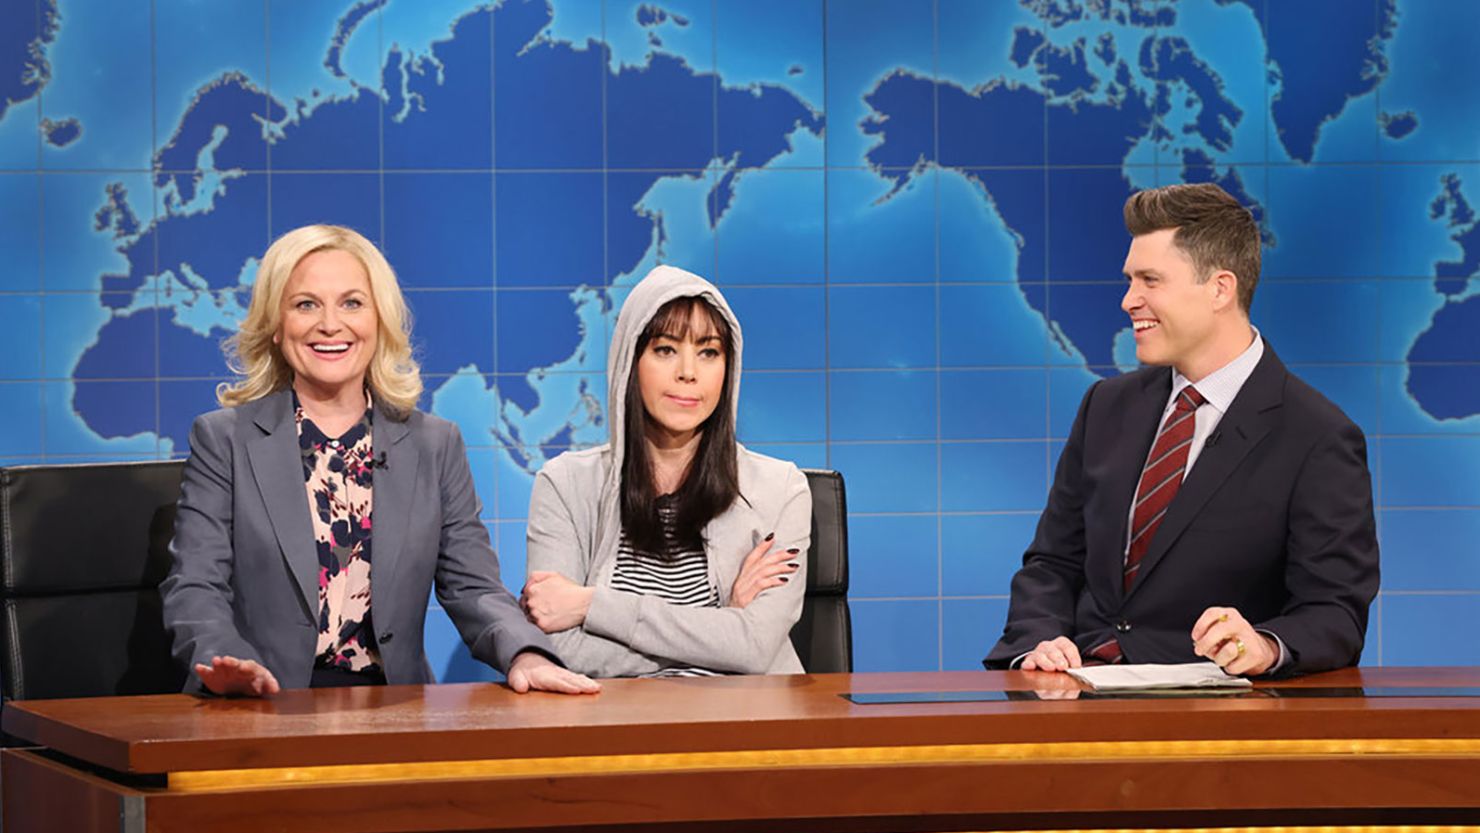 Aubrey Plaza joined by Amy Poehler to reprise ‘Parks and Rec’ roles on ...